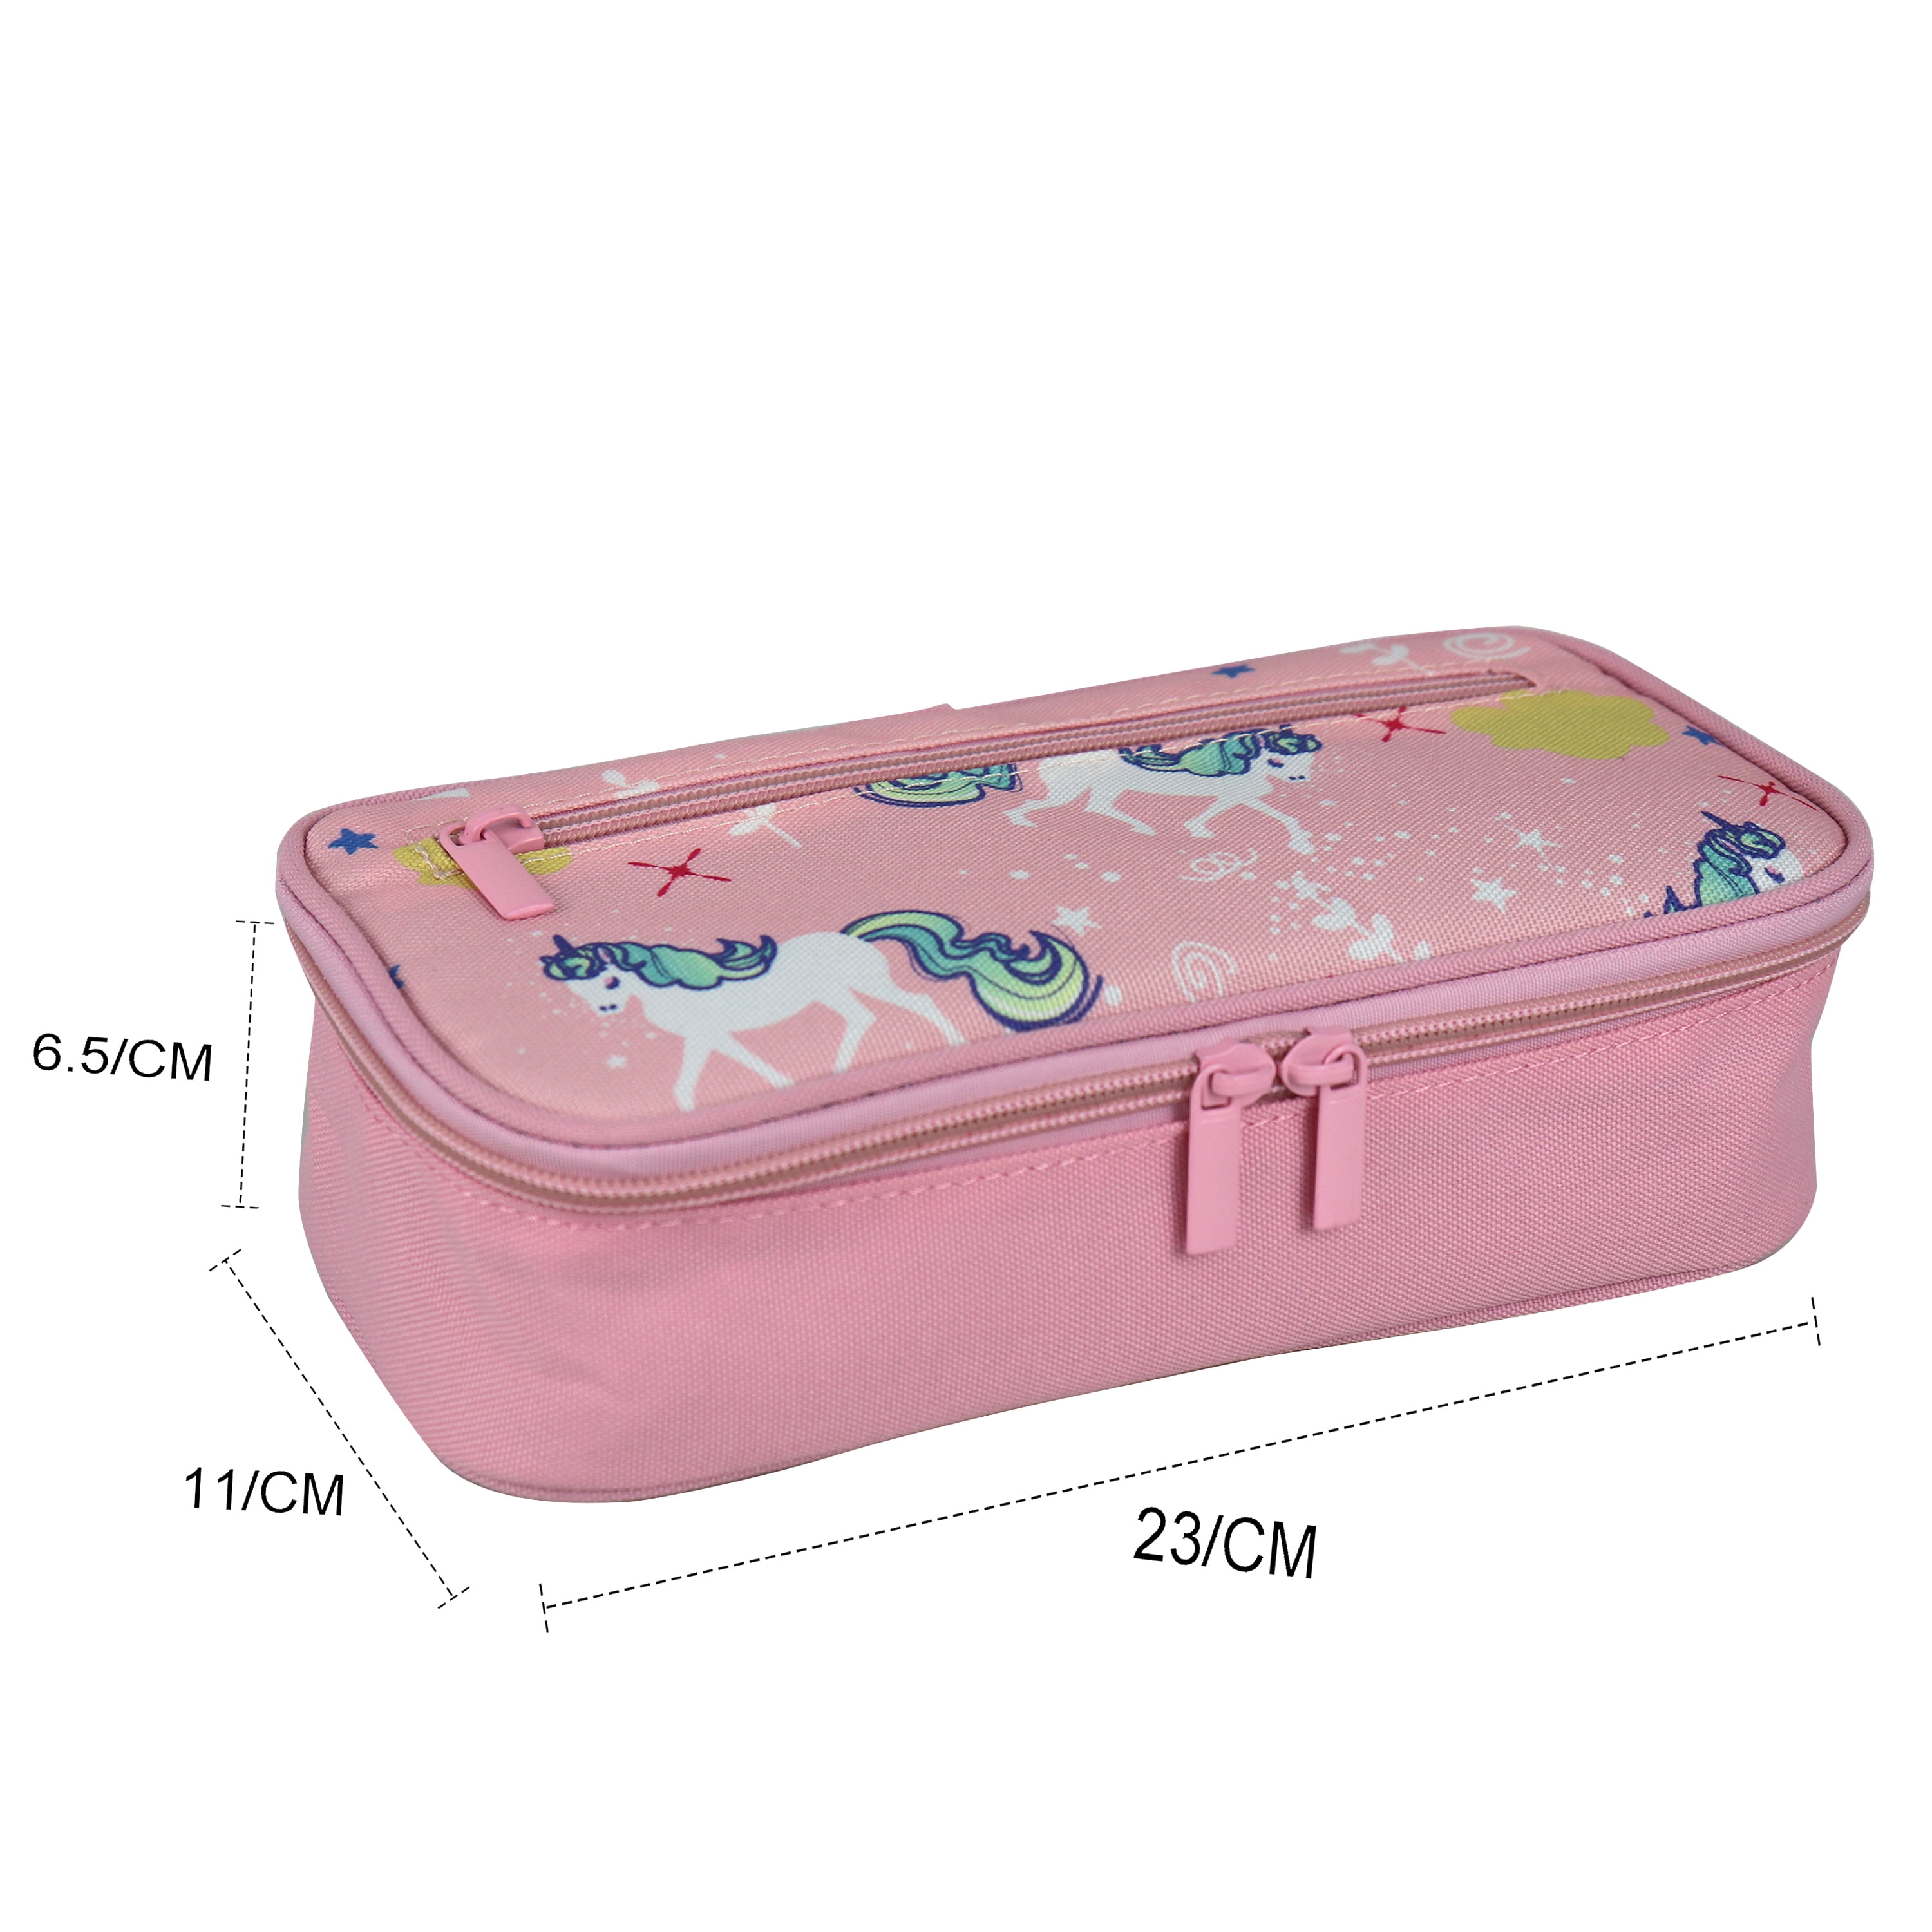 MESA Pink Unicorn Pencil Case for Girls with Mesh, Zippered Pockets and  Holders for Drawing, Writing, Colored and Mechanical Pencils, Cute  Organizer